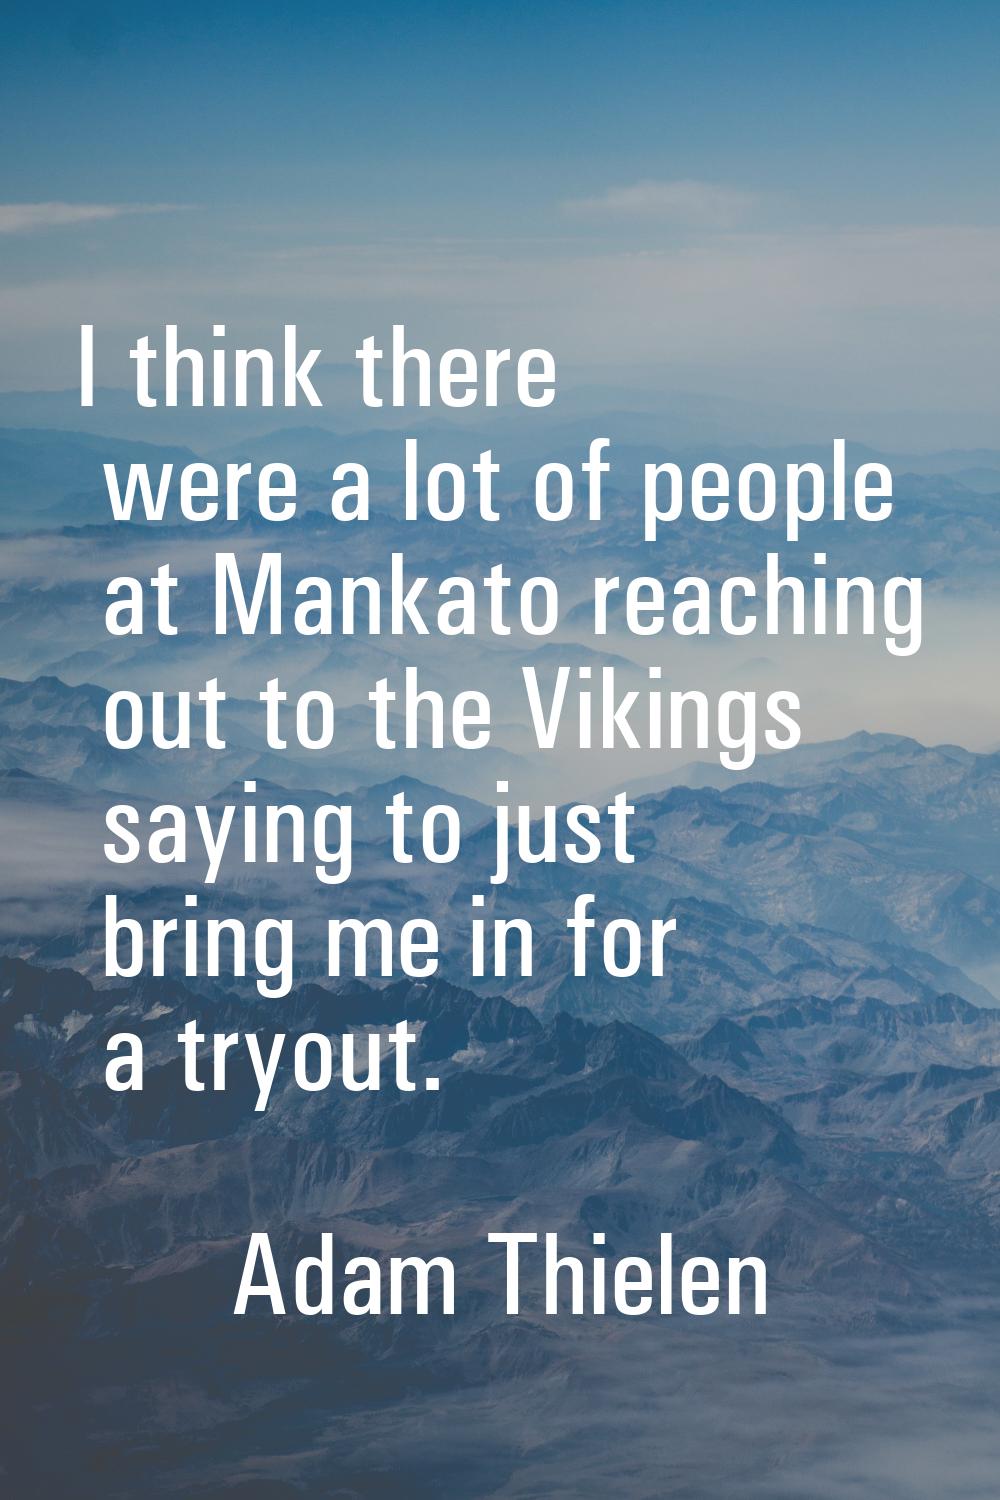 I think there were a lot of people at Mankato reaching out to the Vikings saying to just bring me i